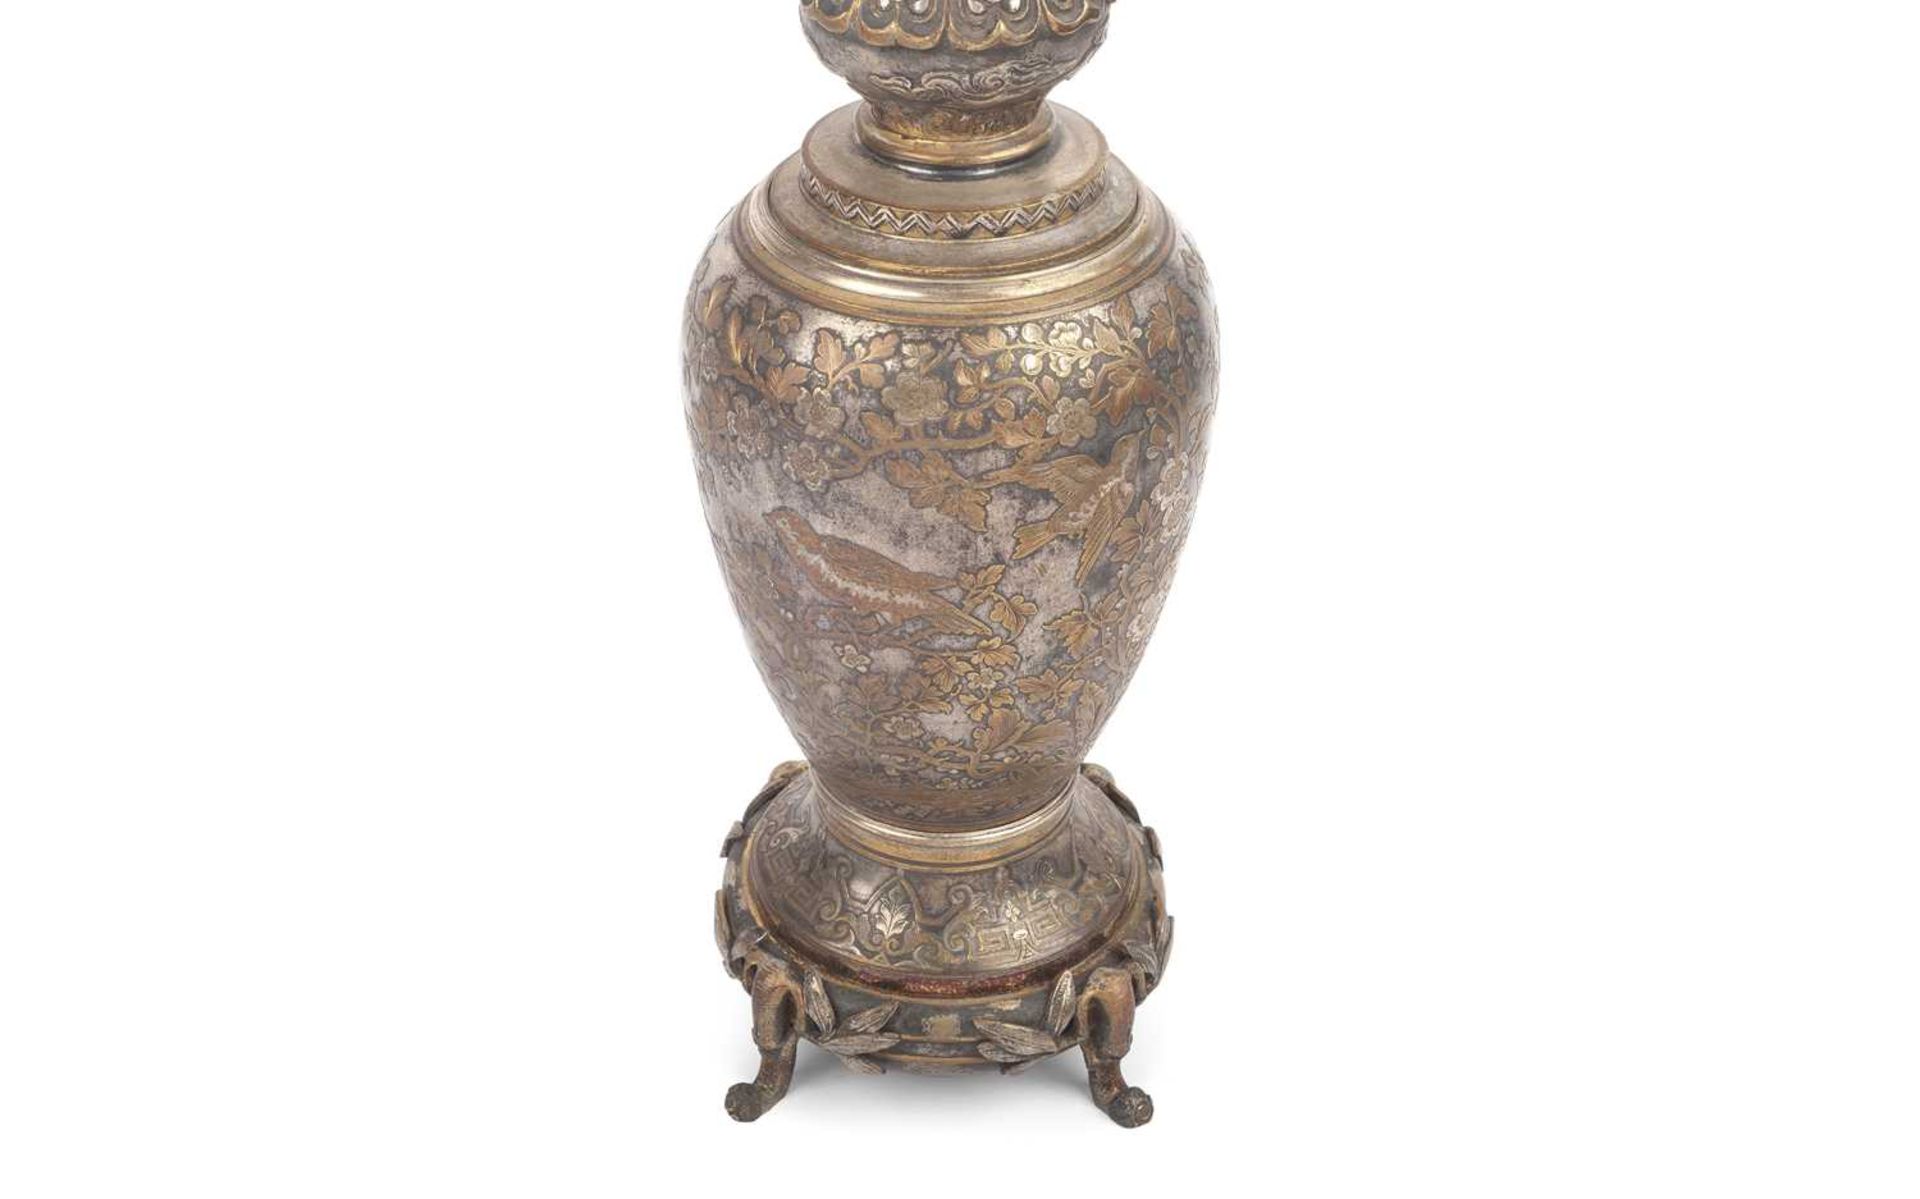 MANNER OF CHRISTOFLE & CIE: A FINE 19TH CENTURY FRENCH JAPONISME STYLE SILVERED METAL LAMP BASE - Image 4 of 5